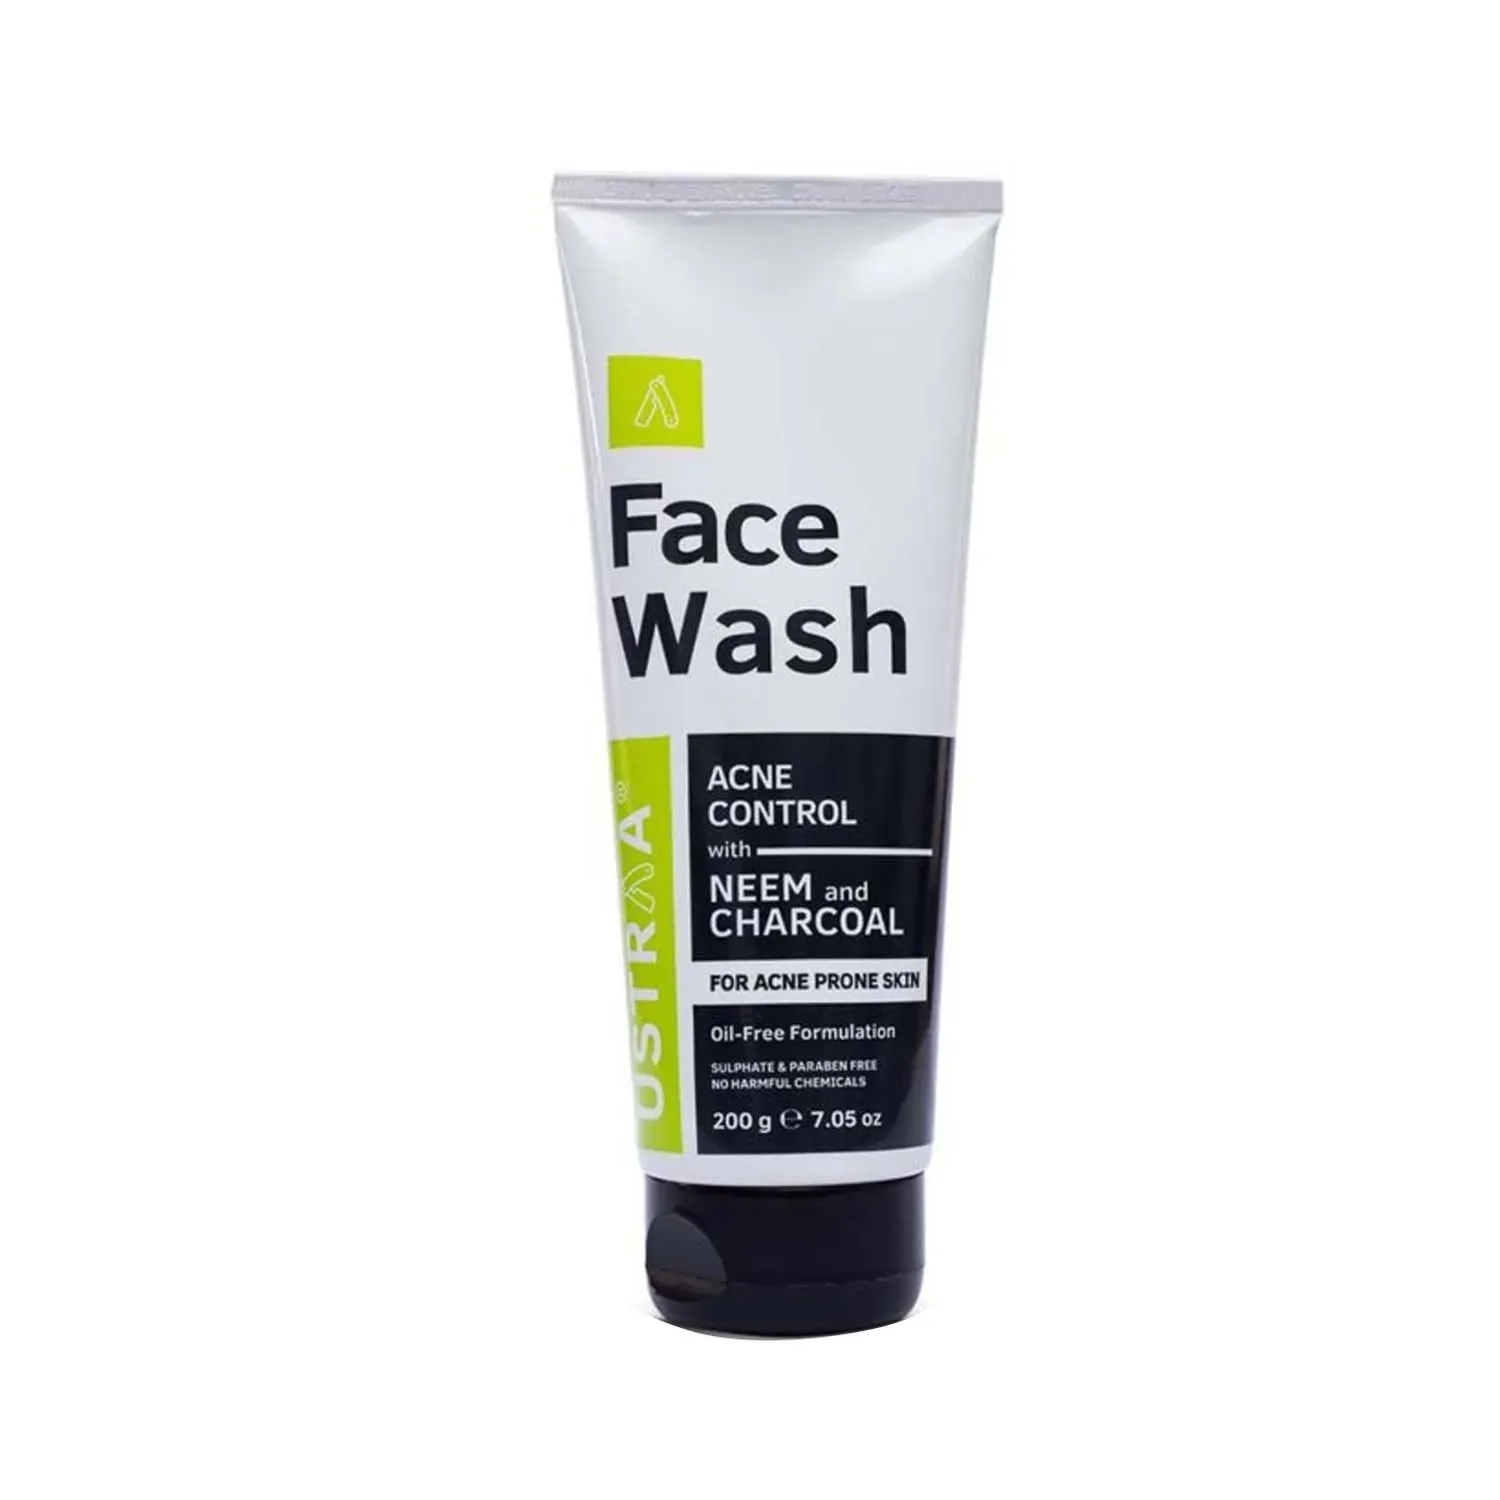 Ustraa Acne Control Neem & Charcoal Face Wash - (200g)